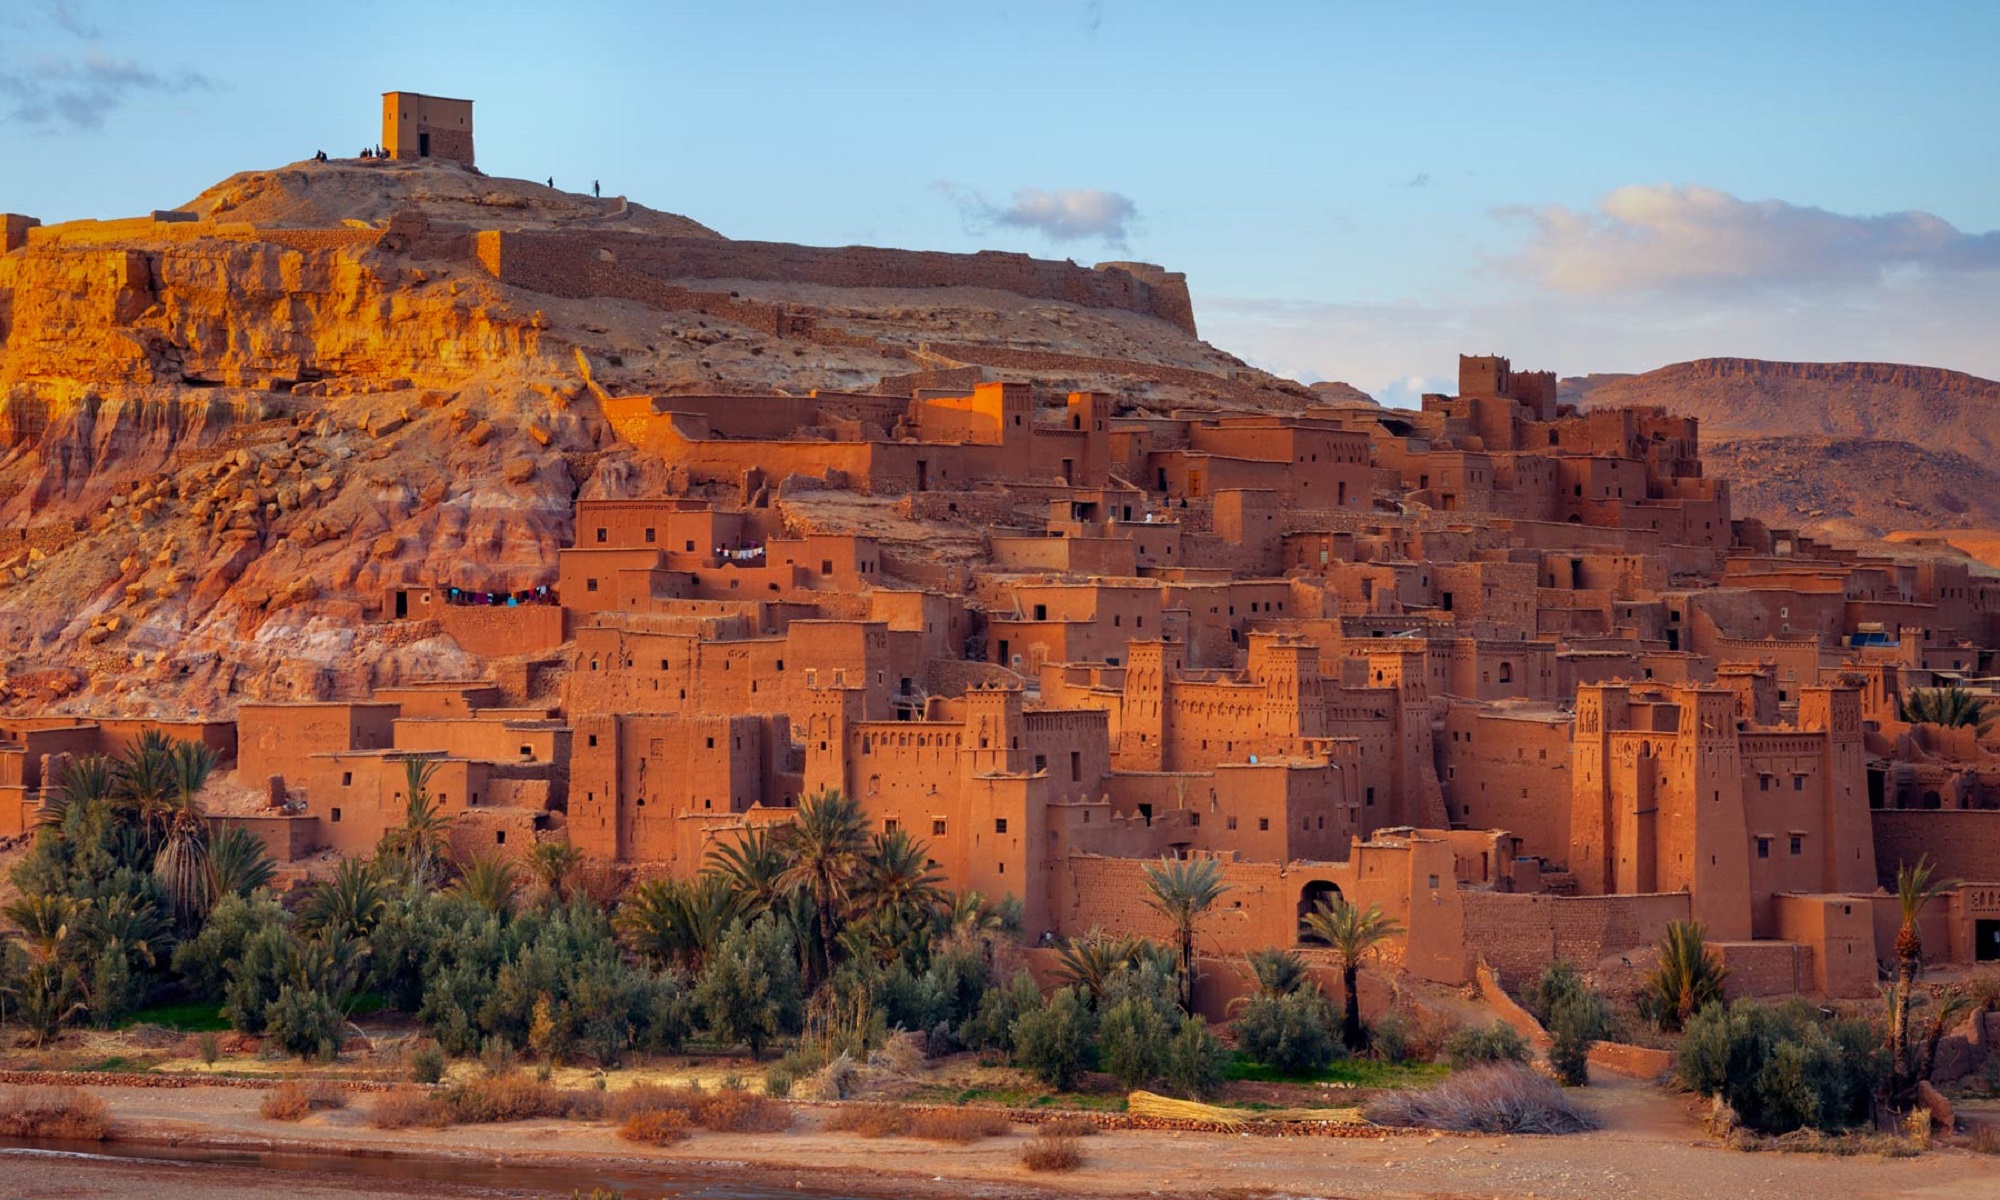 Old city in the Moroccan desert.